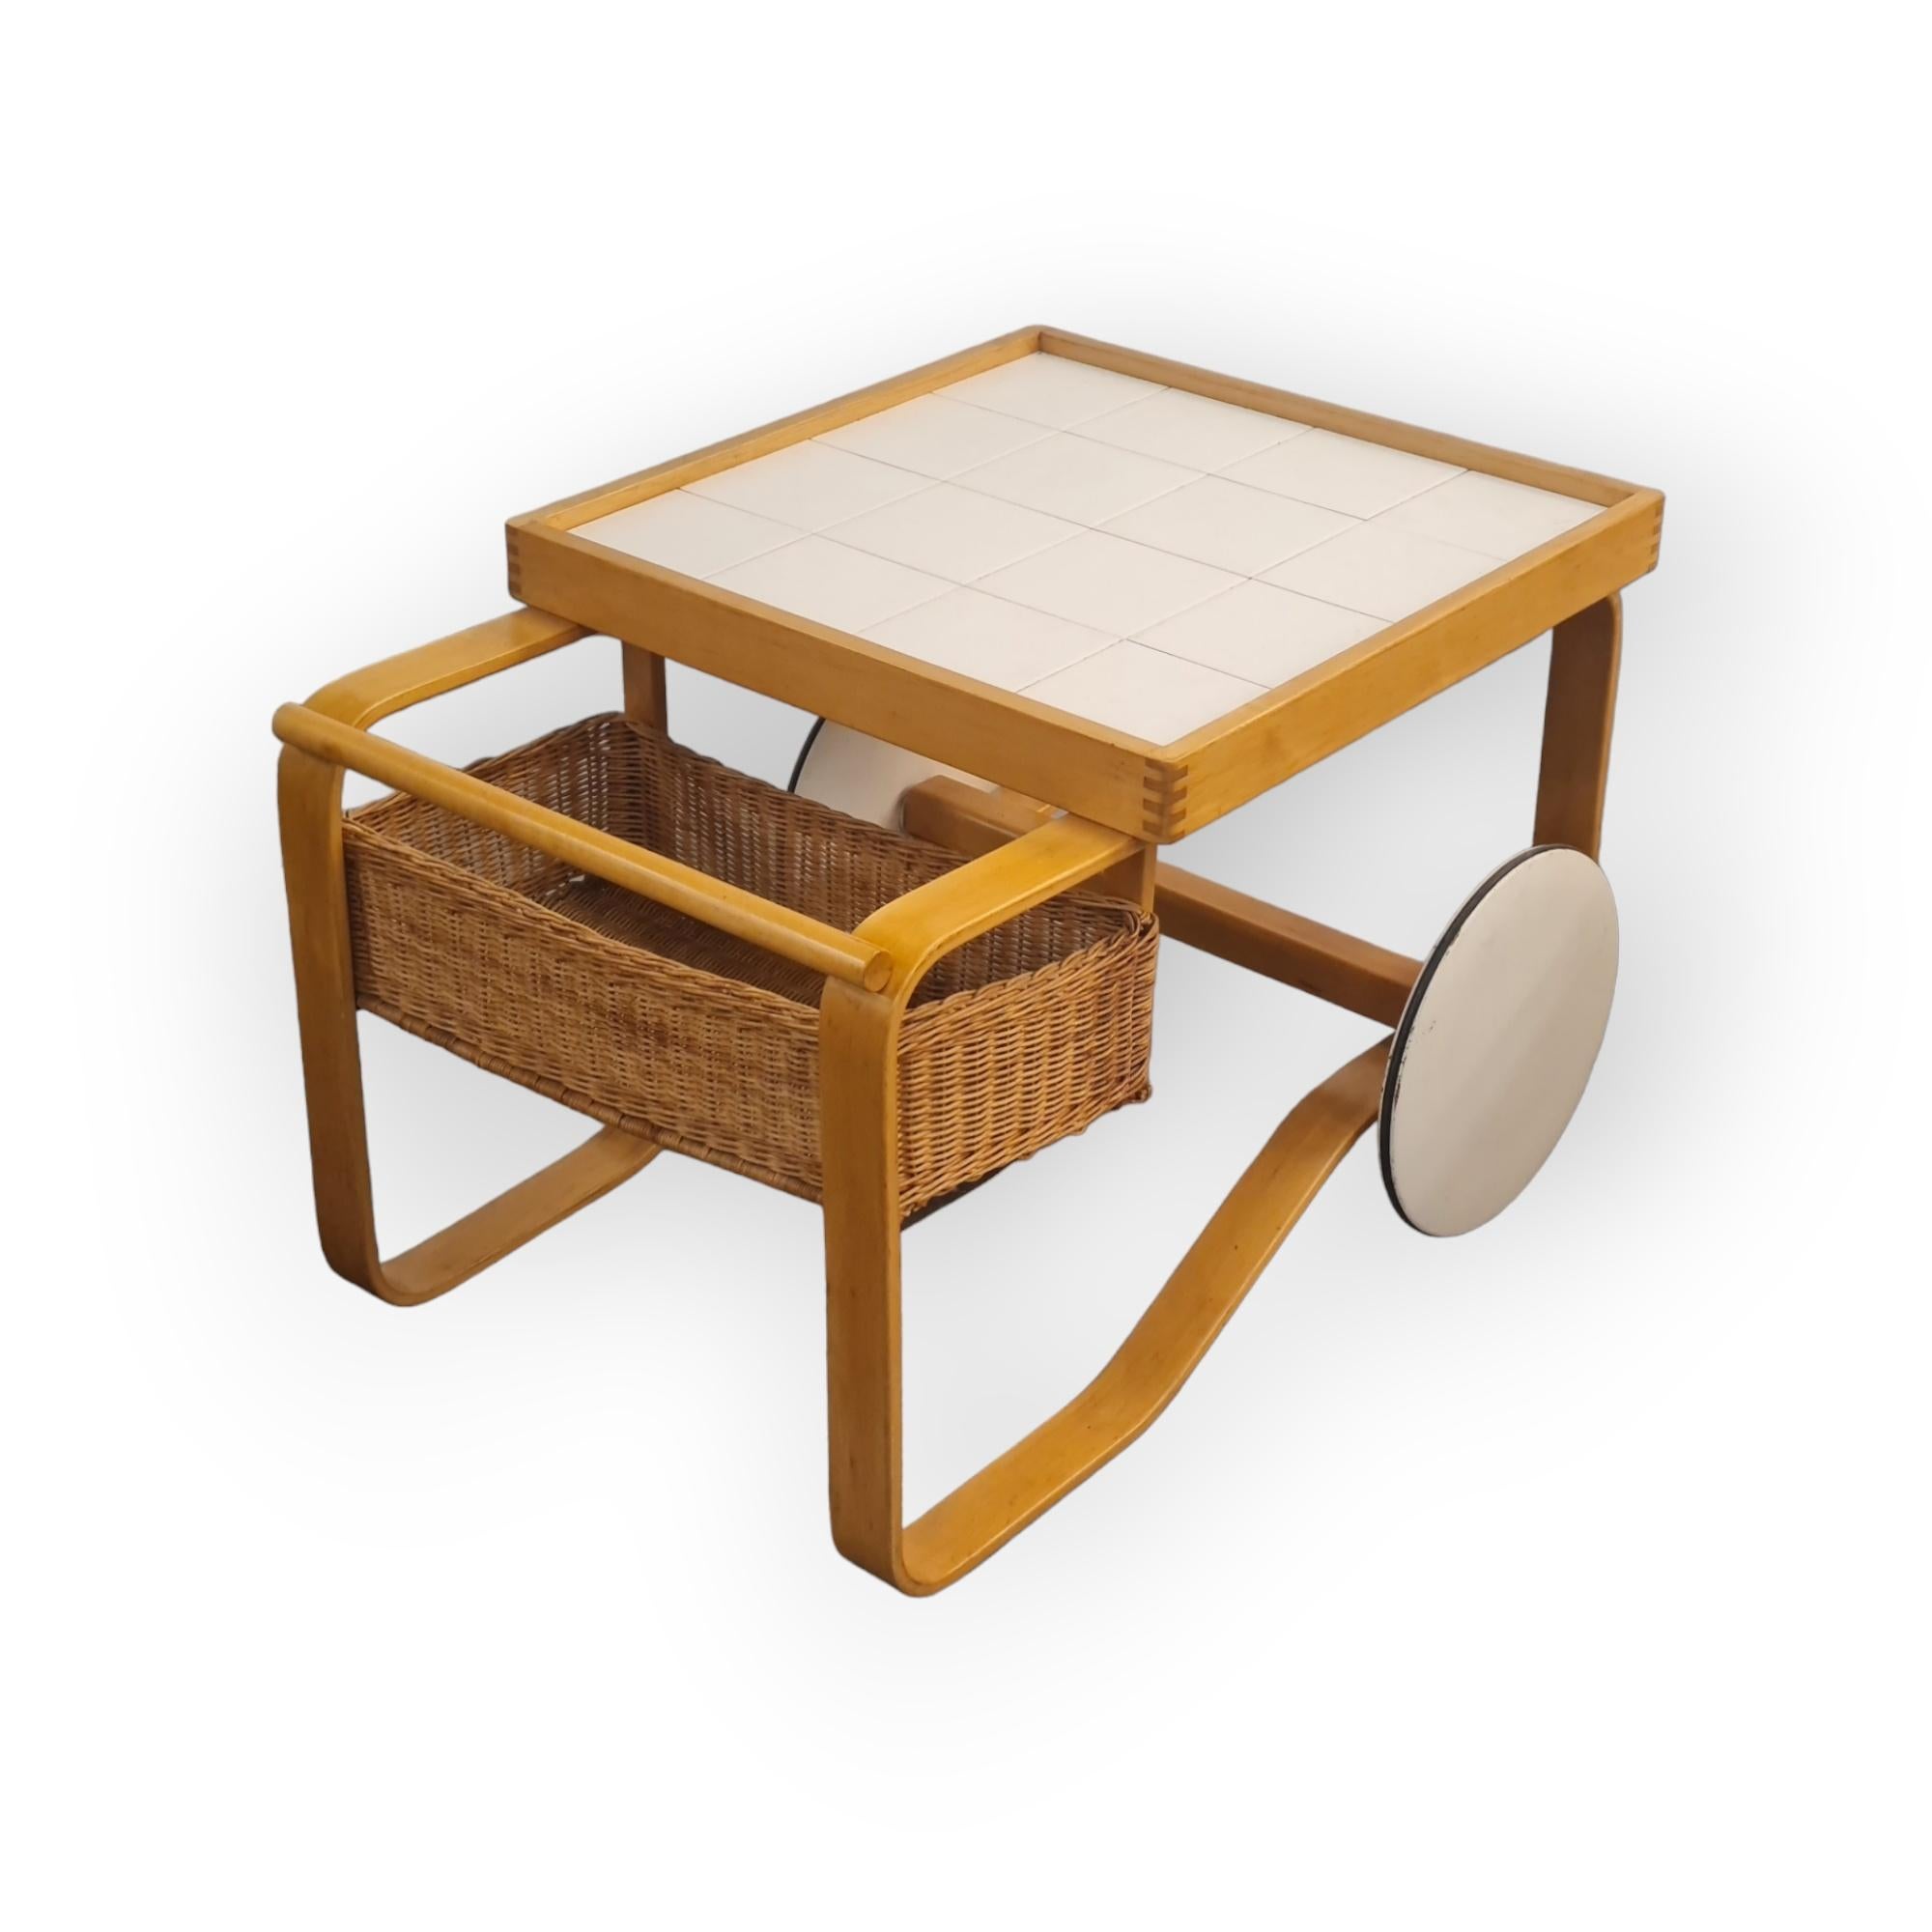 One of the most iconic and sought after pieces designed by Alvar Aalto. This traditional, elegant and pragmatic tea cart is made in the style of Scandinavian modern design. The trolley features ceramic tiles, and a rattan basket which makes it